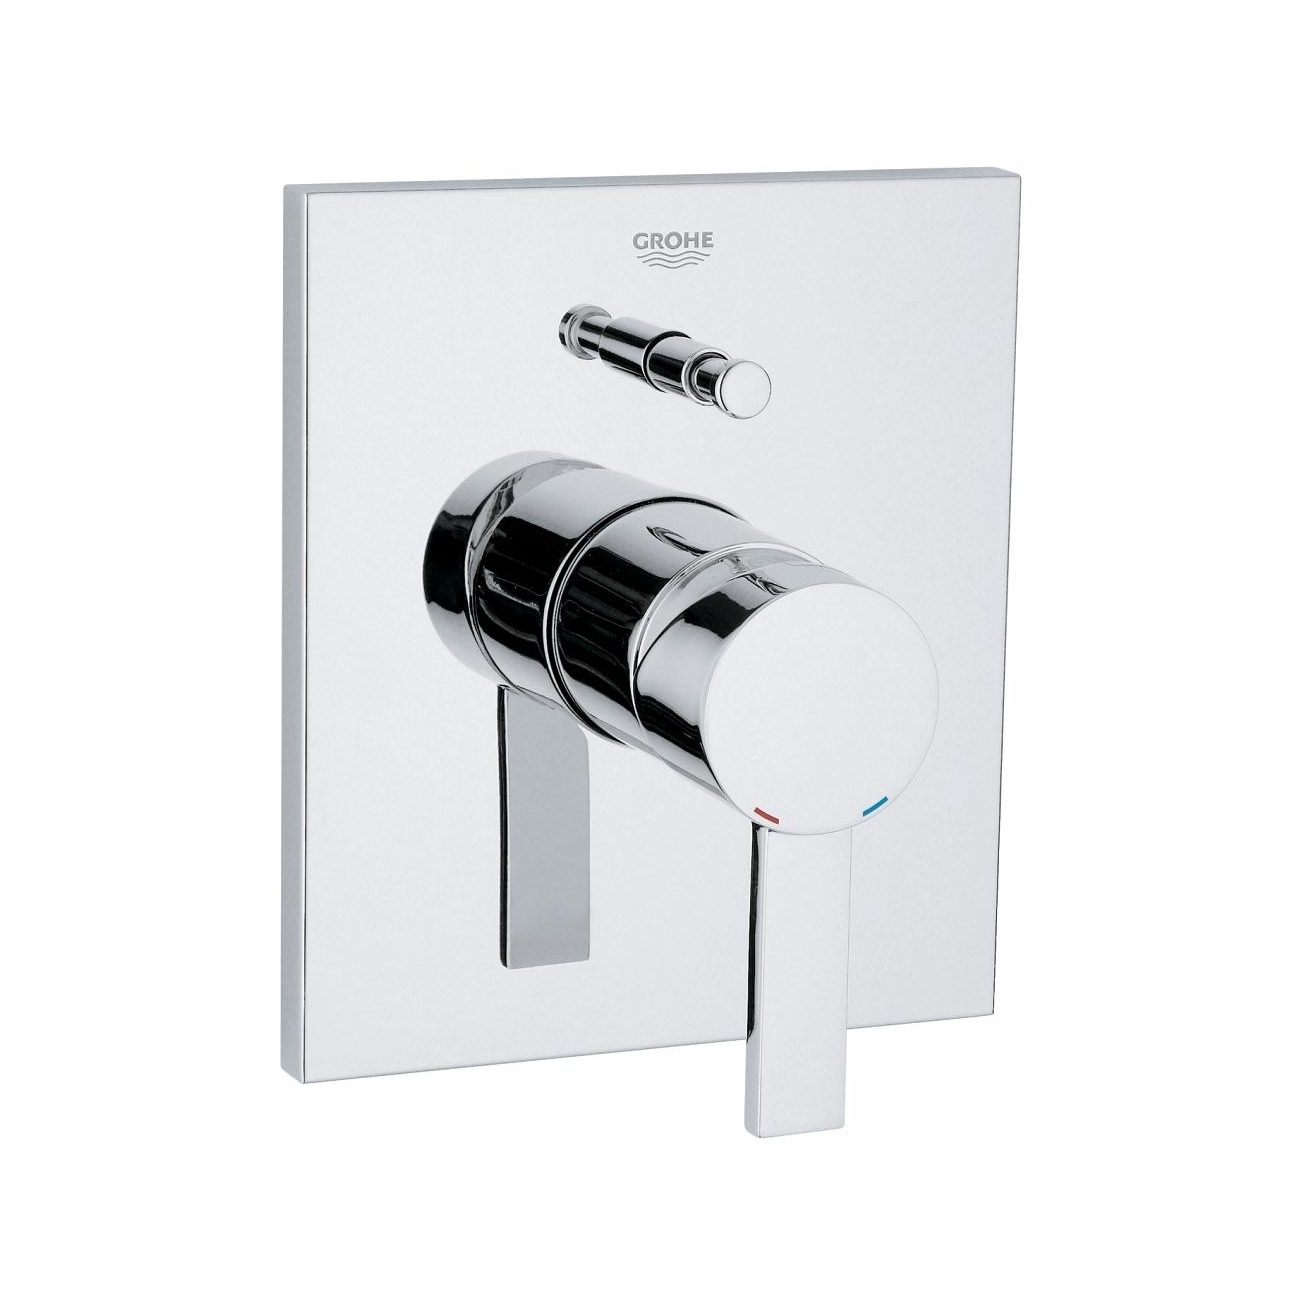 GROHE ALLURE Bath-shower mixer with diverter